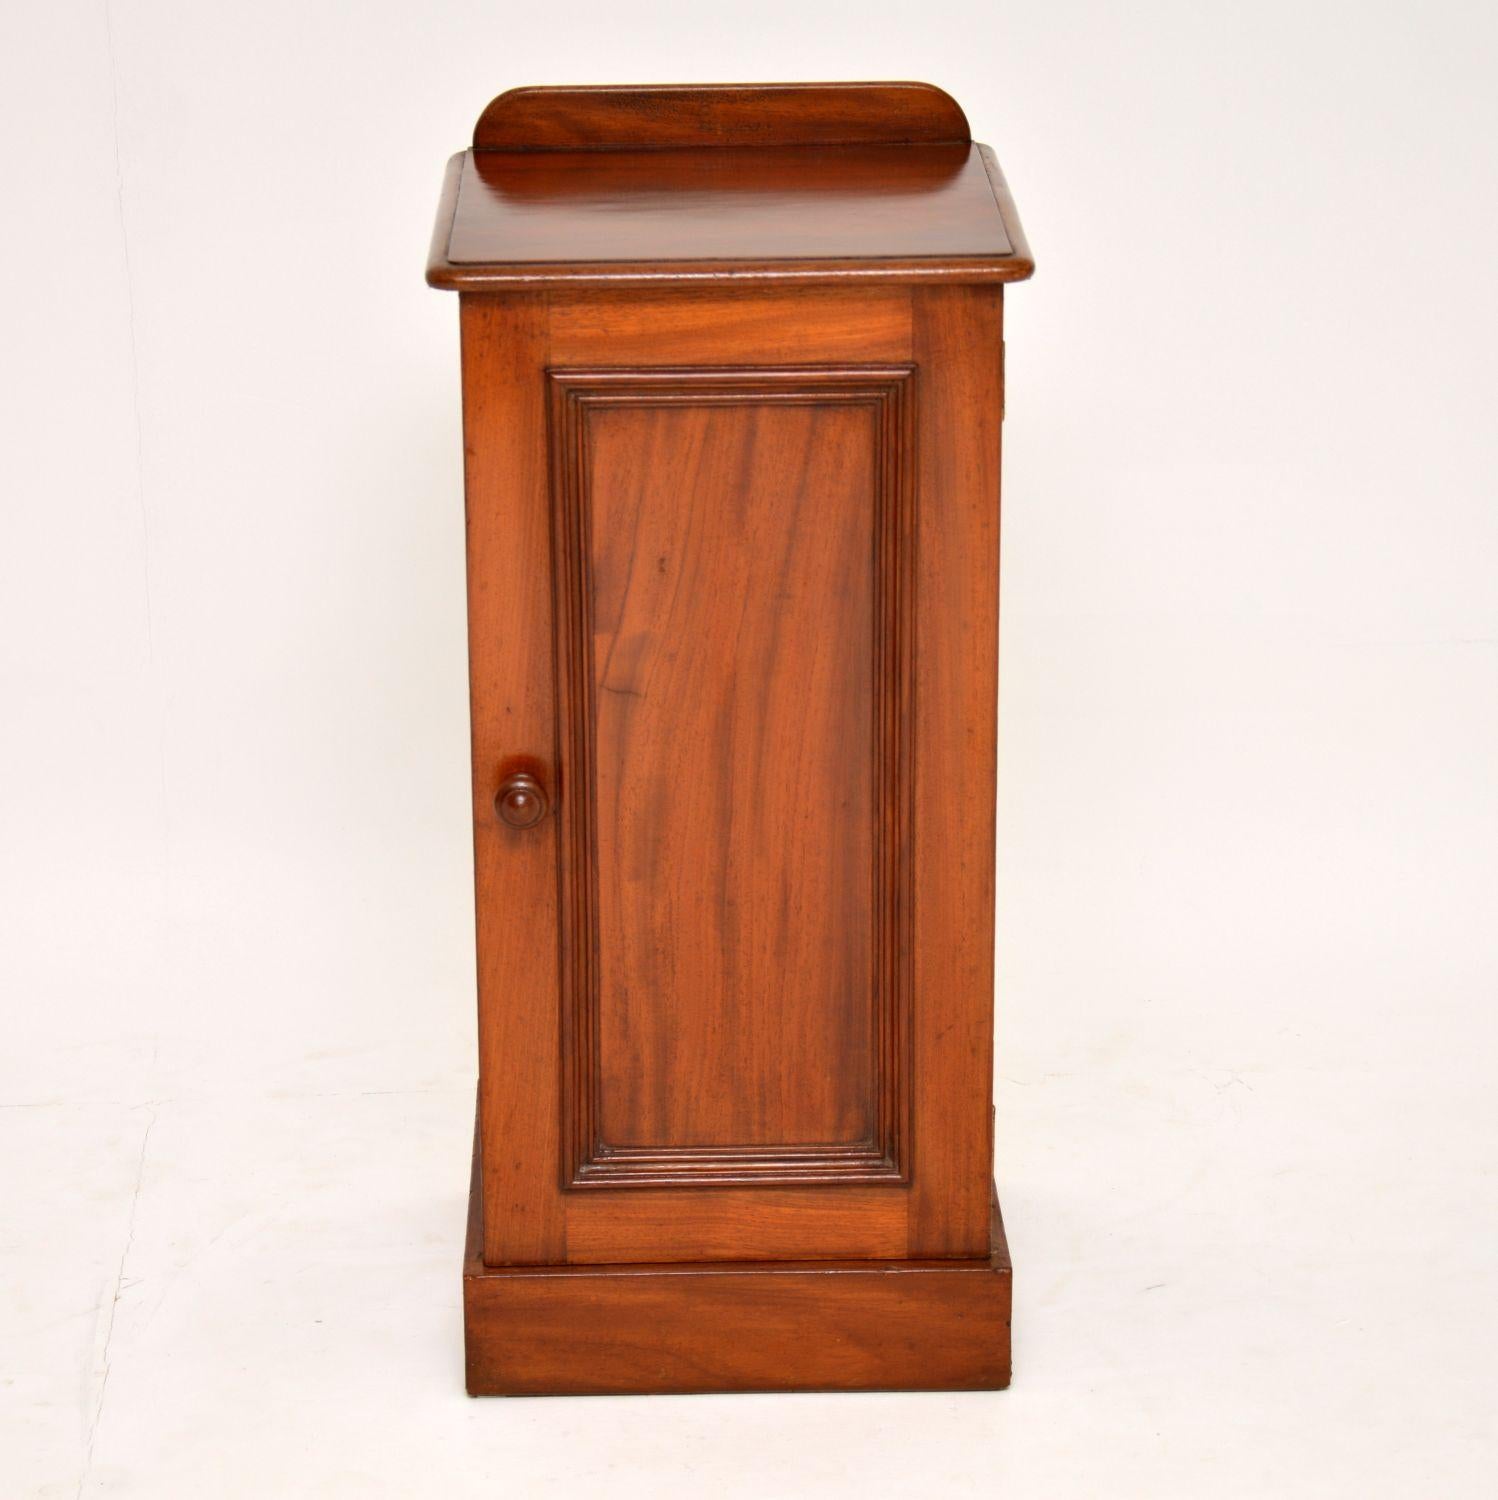 Antique Victorian mahogany bedside cabinet which could be used anywhere in the home. It’s in good original condition and is a very practicable piece of furniture. This cabinet has the original back gallery, a panelled door, plenty of storage and